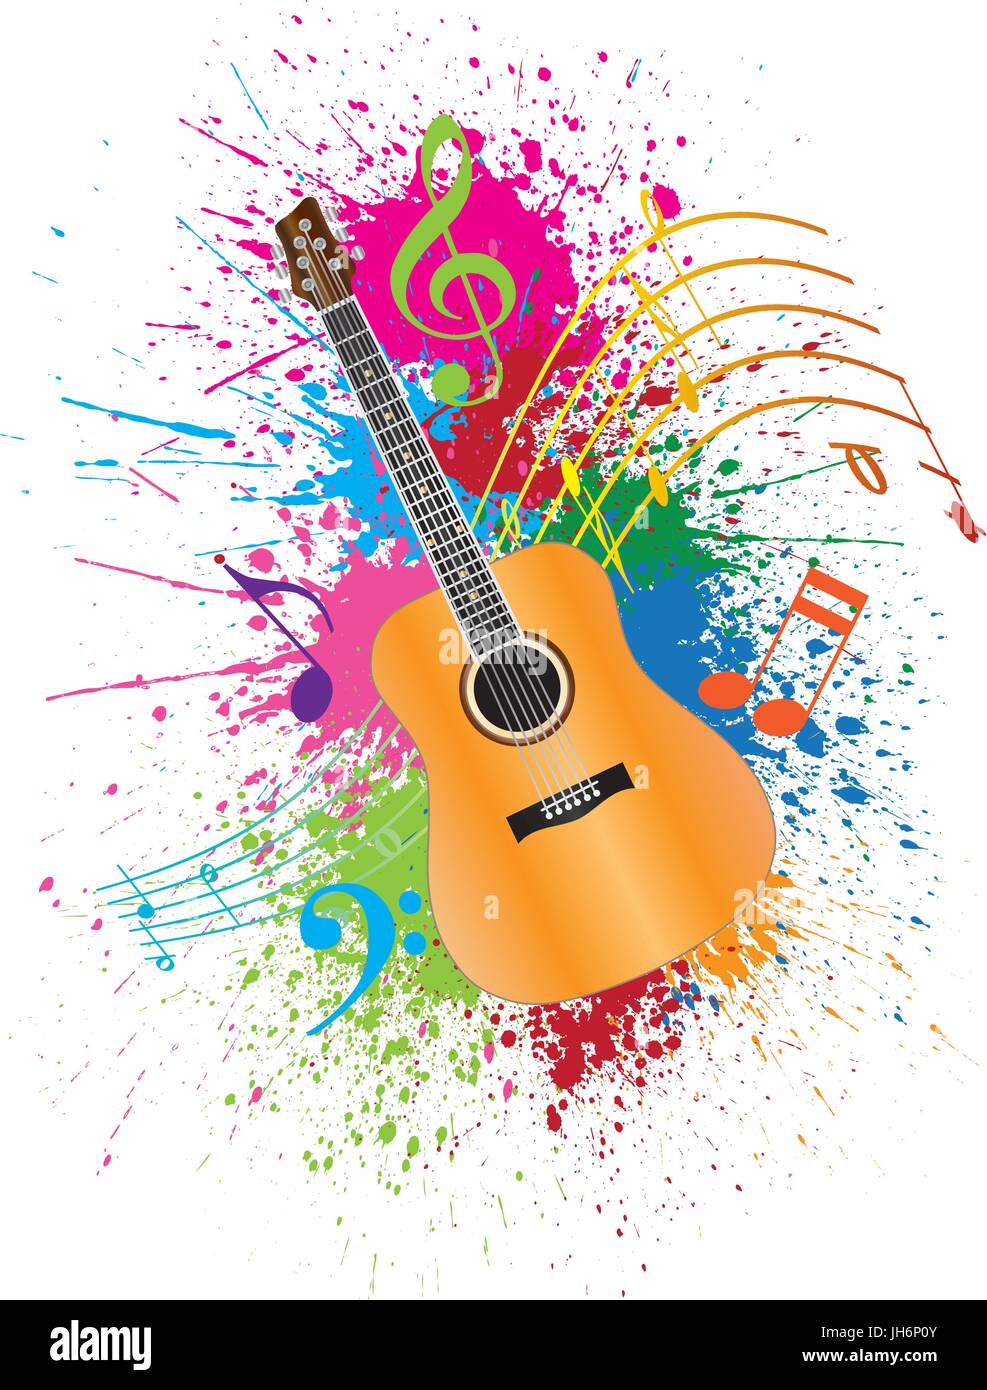 Acoustic Guitar with Musical Notes and Paint Splatter Abstract Effect Color Illustration Stock Vector